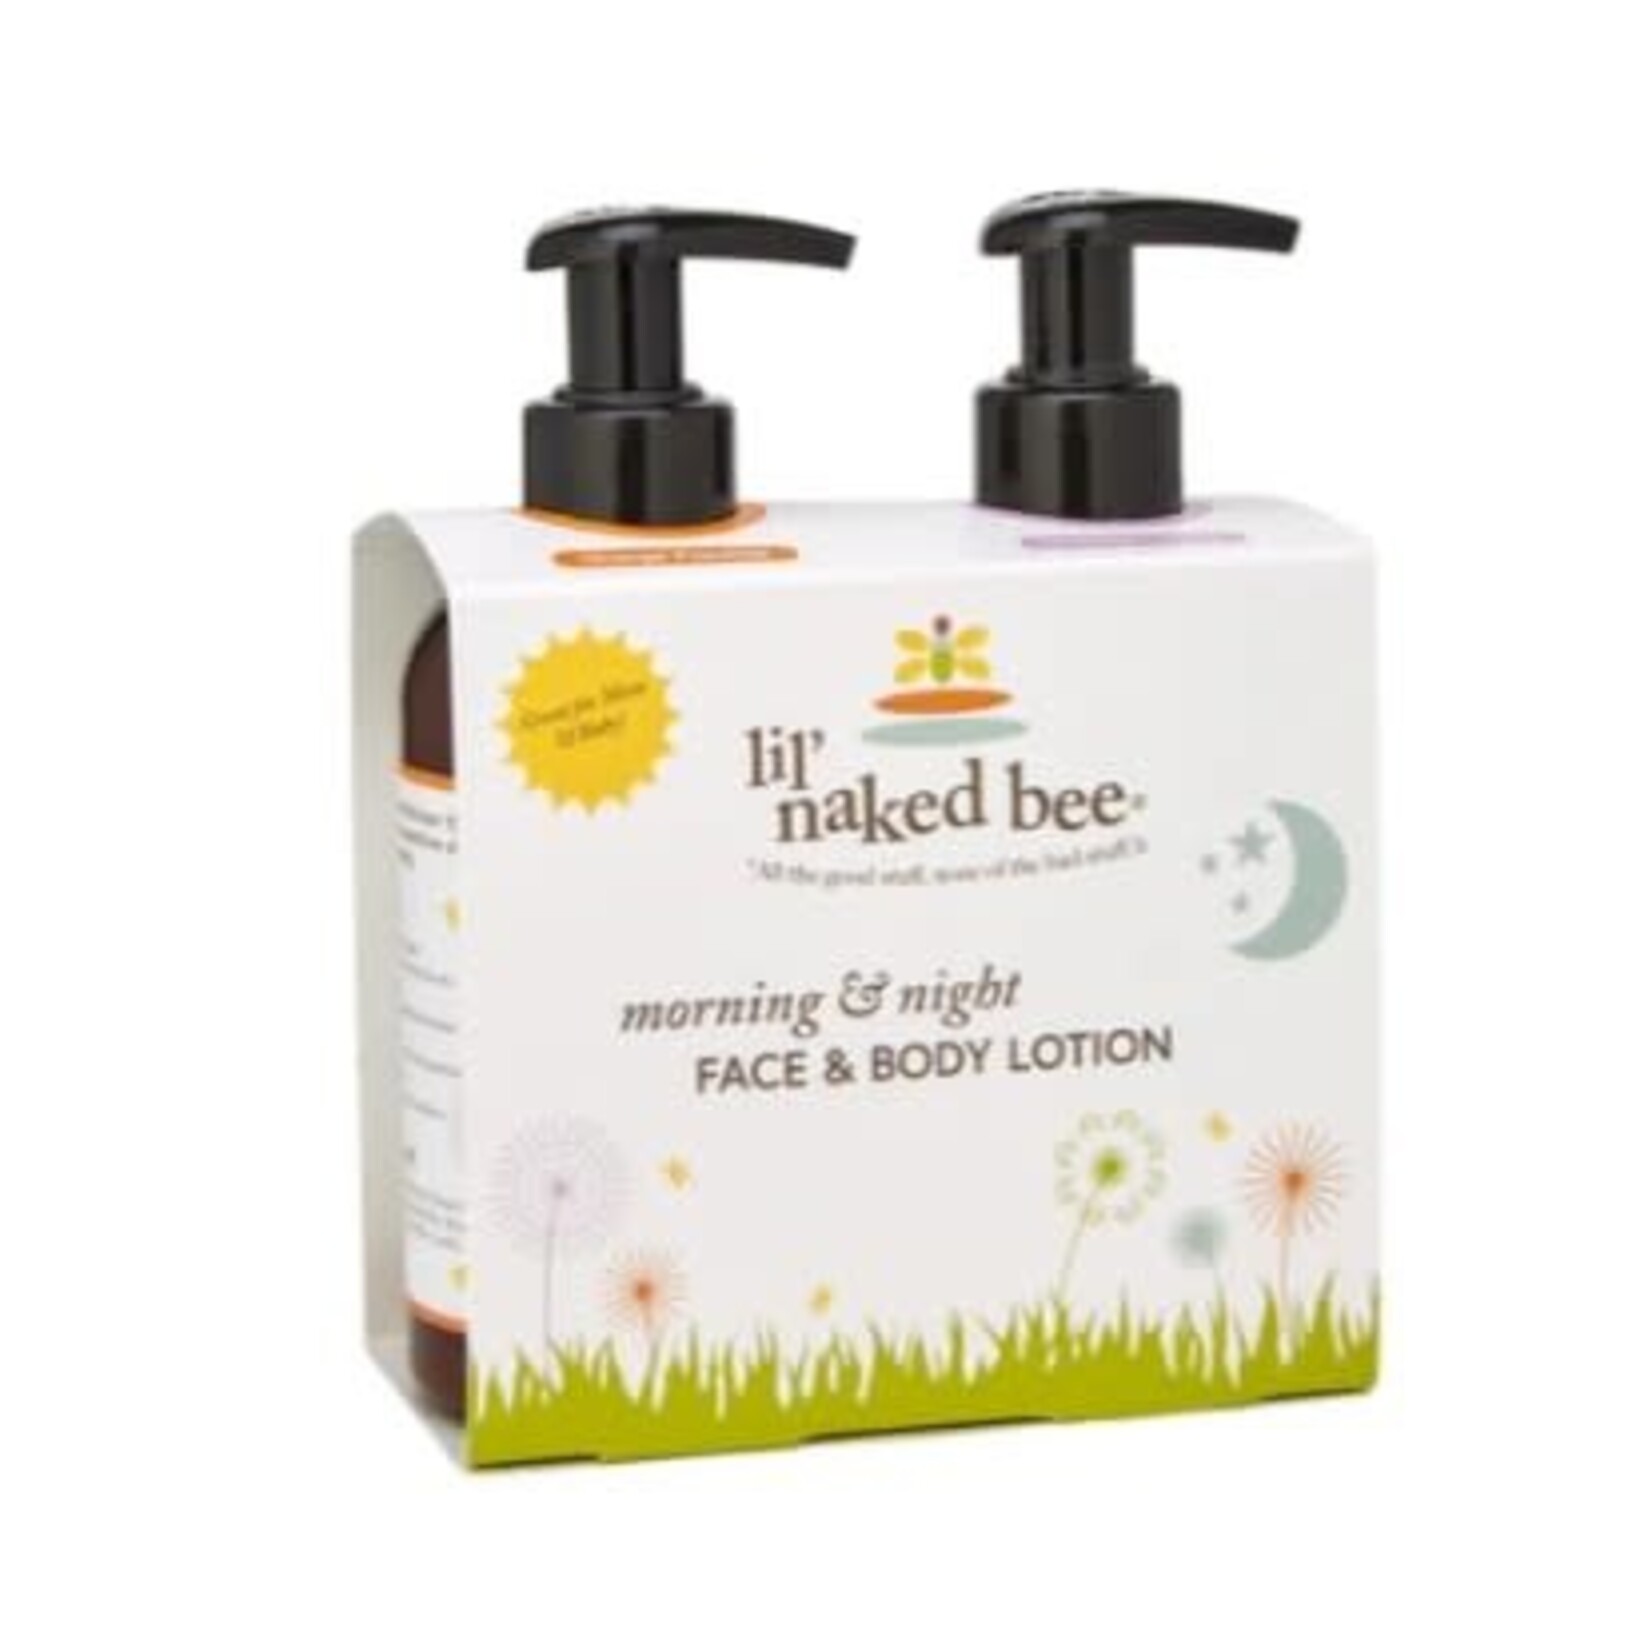 The Naked Bee Lil' Naked Bee Morning & Night Face & Body Lotion